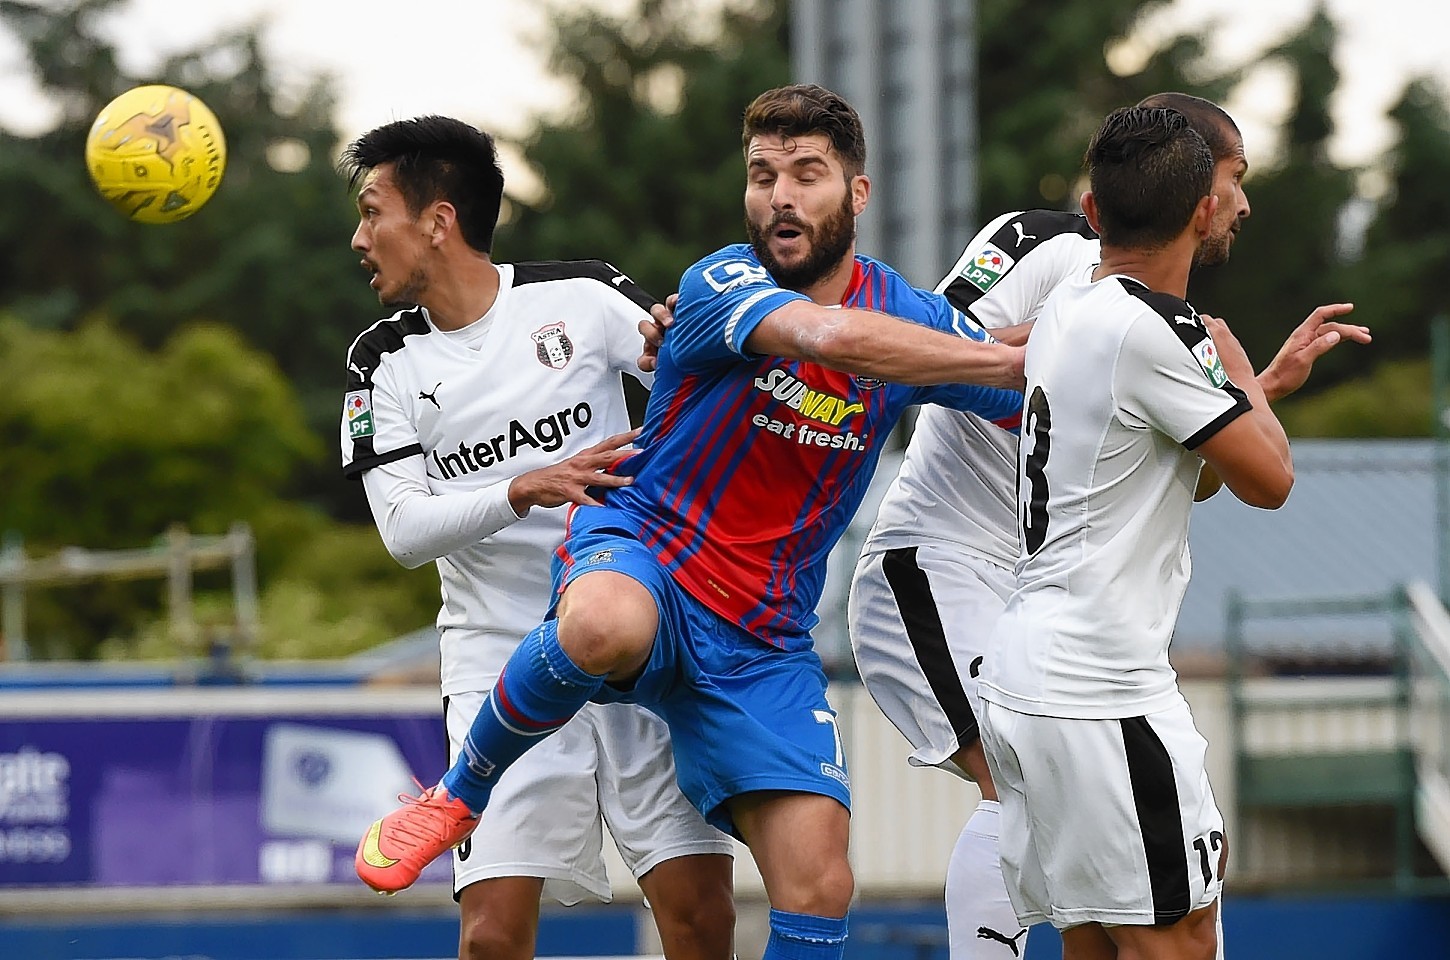  Dani Lopez has been added to boost the Inverness attack